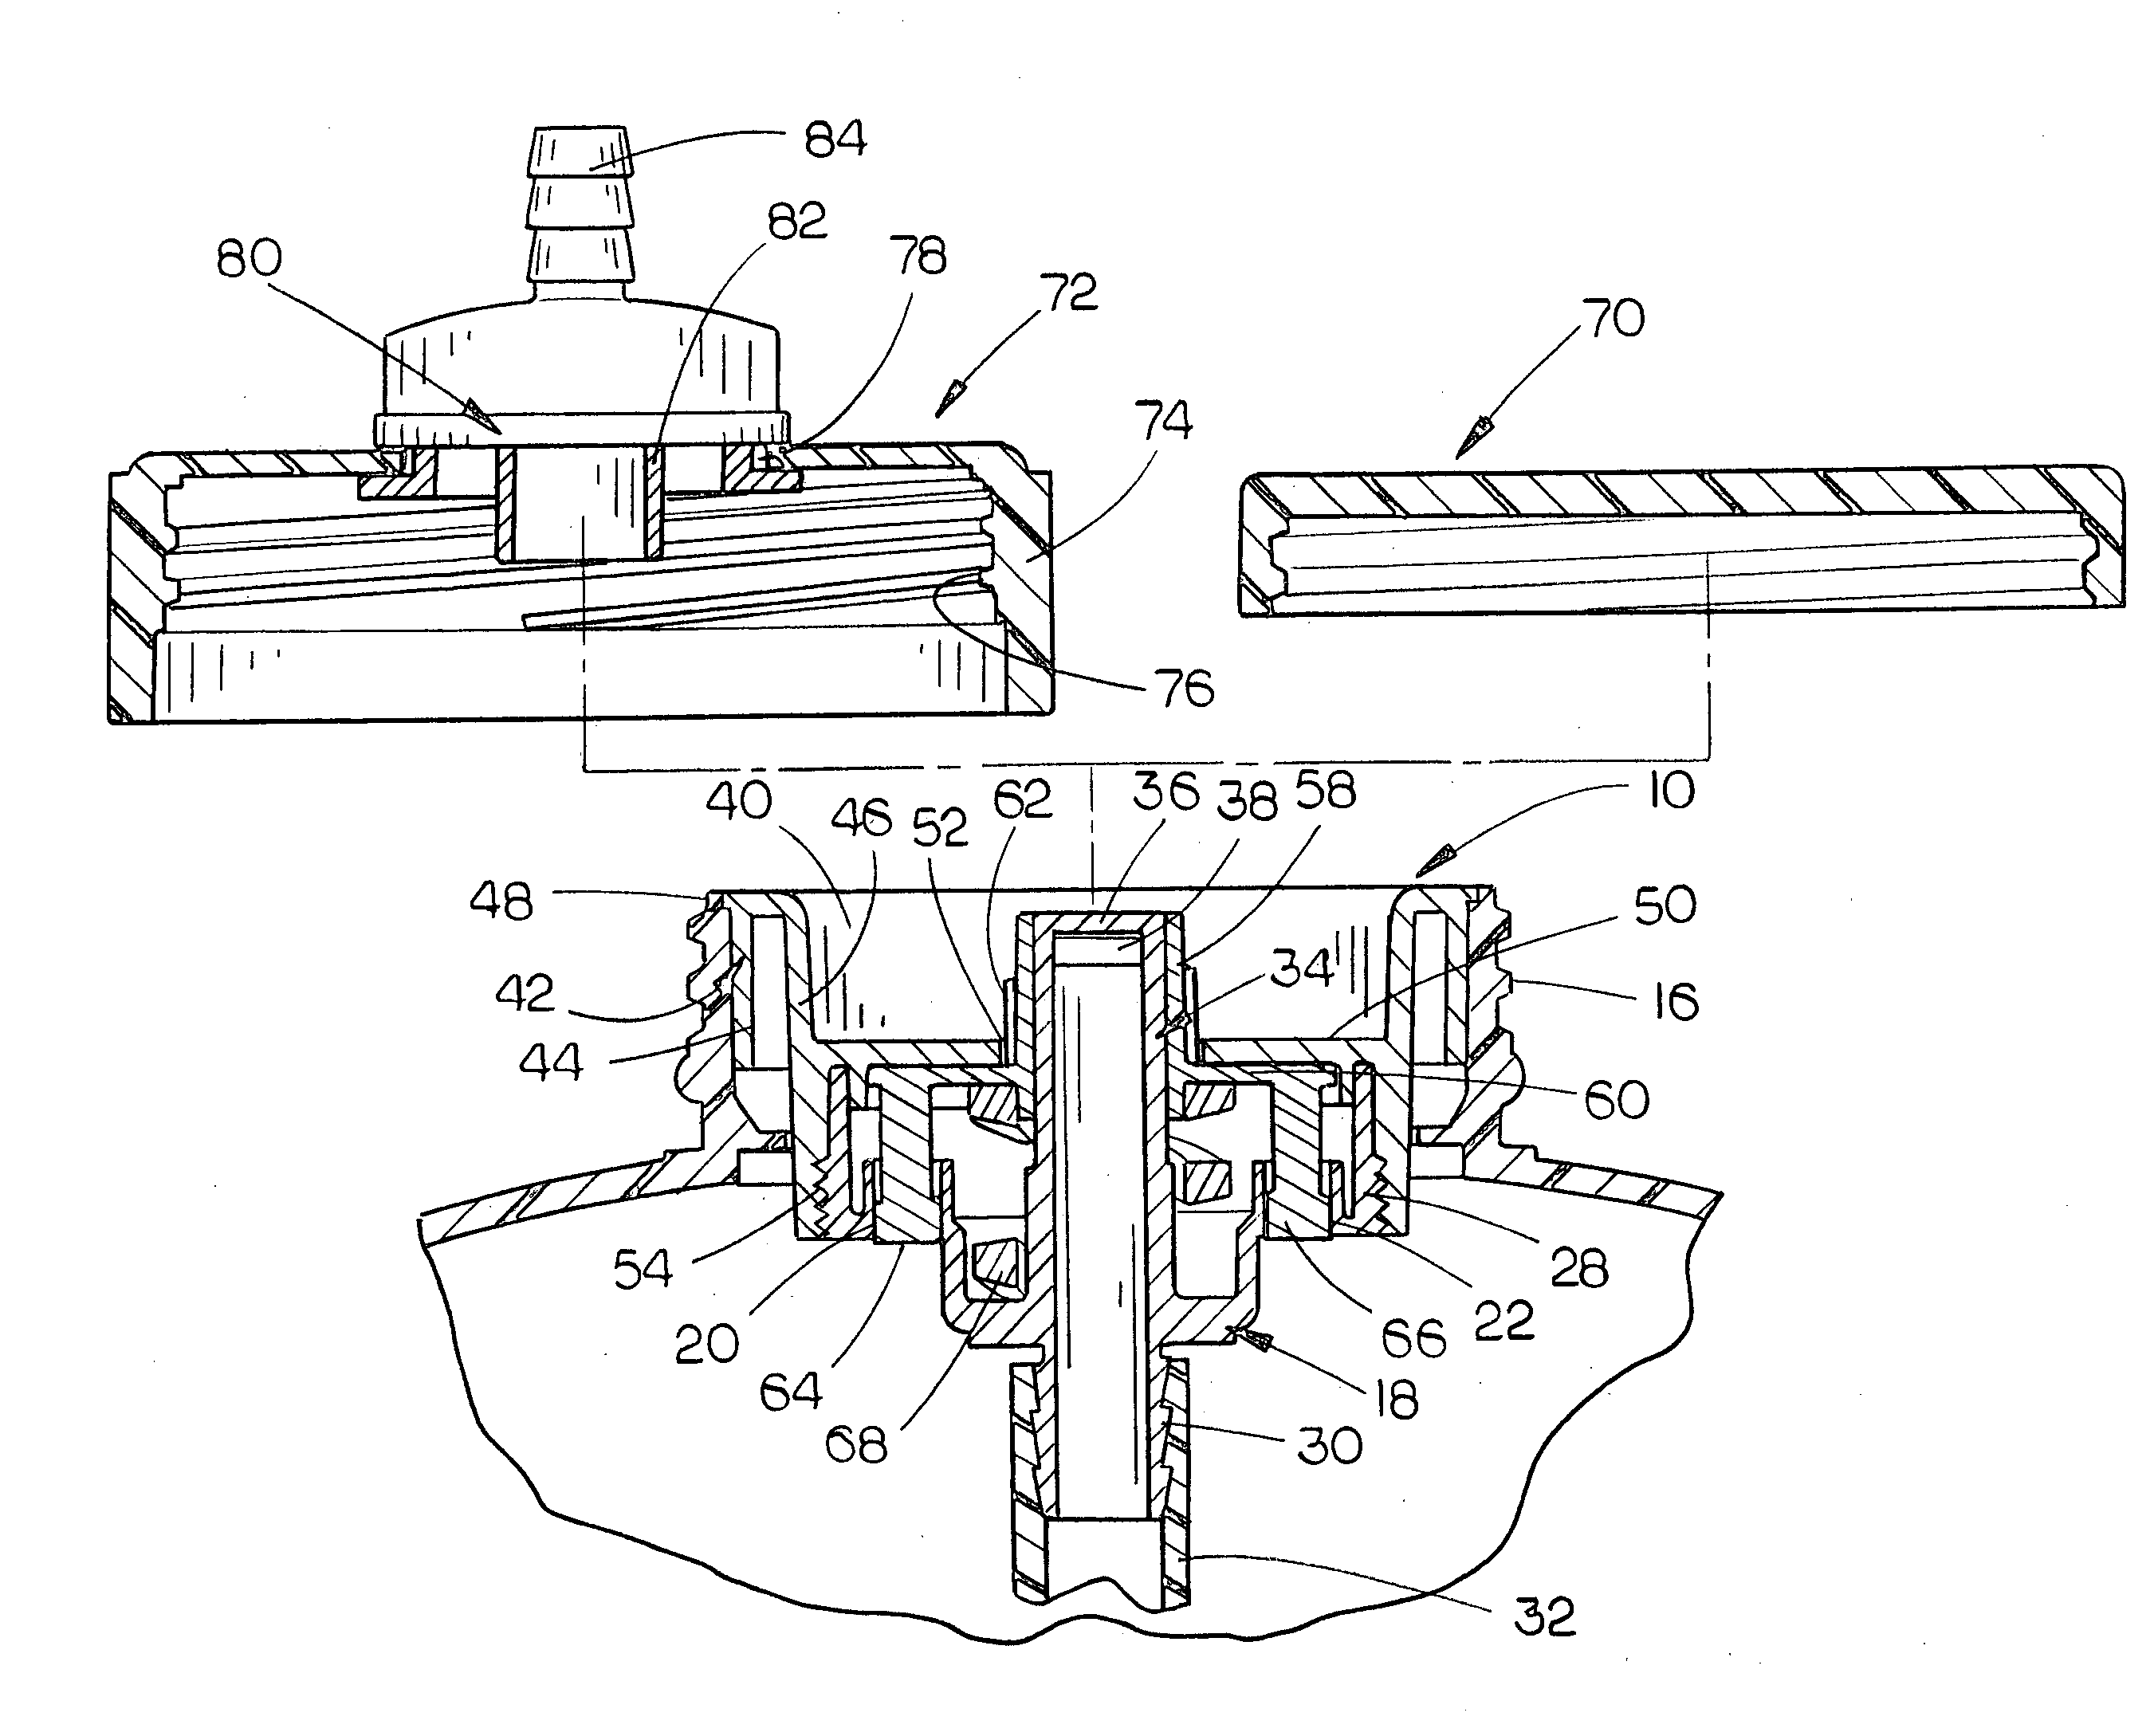 Closed loop dispensing system with mechanical venting means